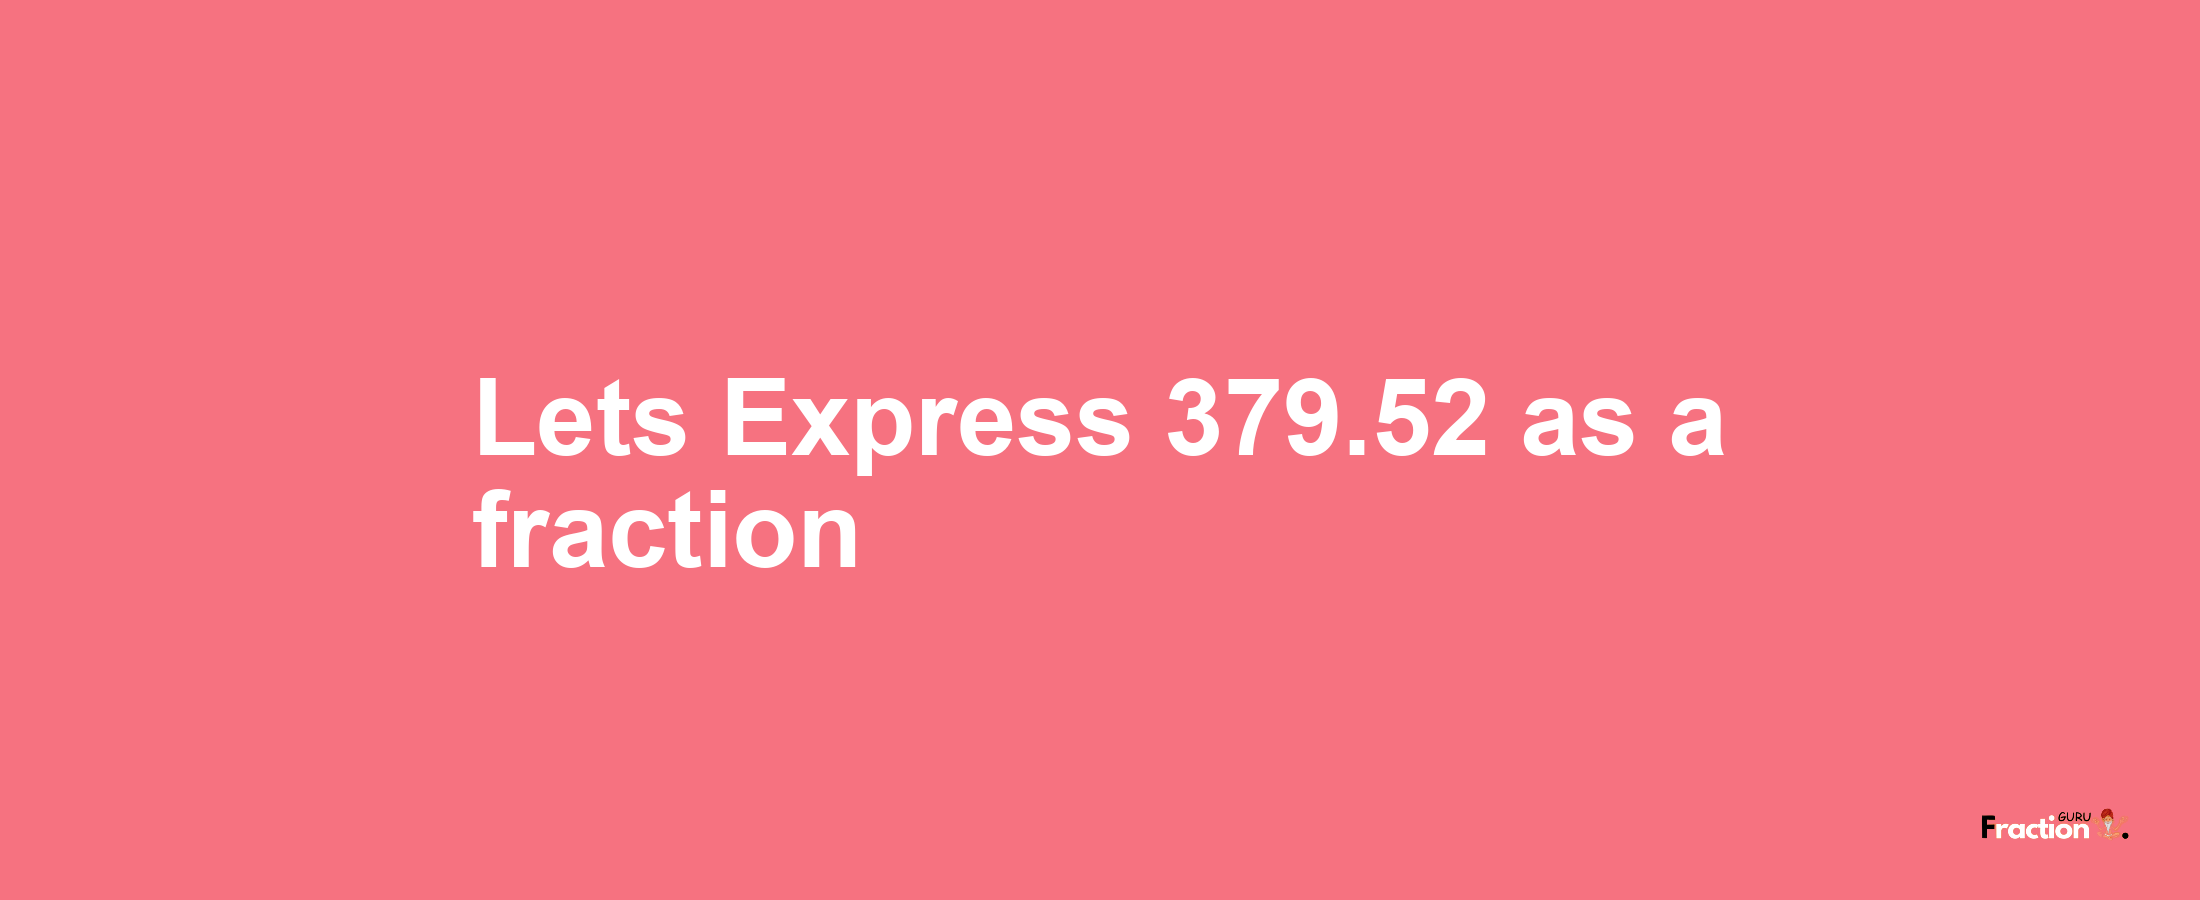 Lets Express 379.52 as afraction